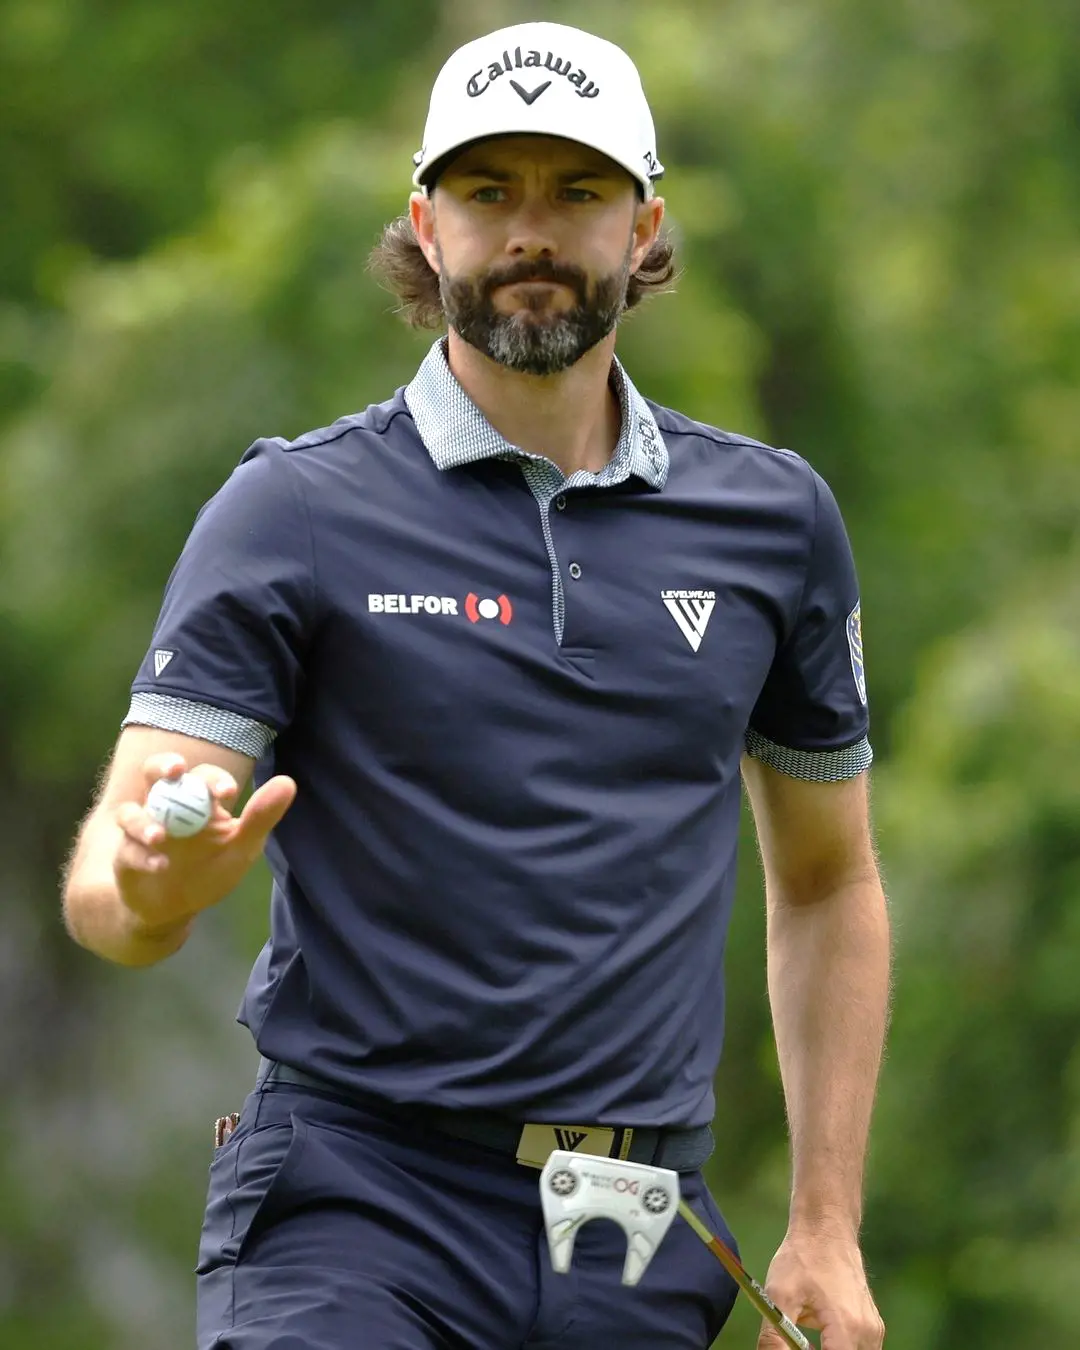 Adam Hadwin is a Canadian Golfer who finished second in the Rocket Mortgage Classic in 2023